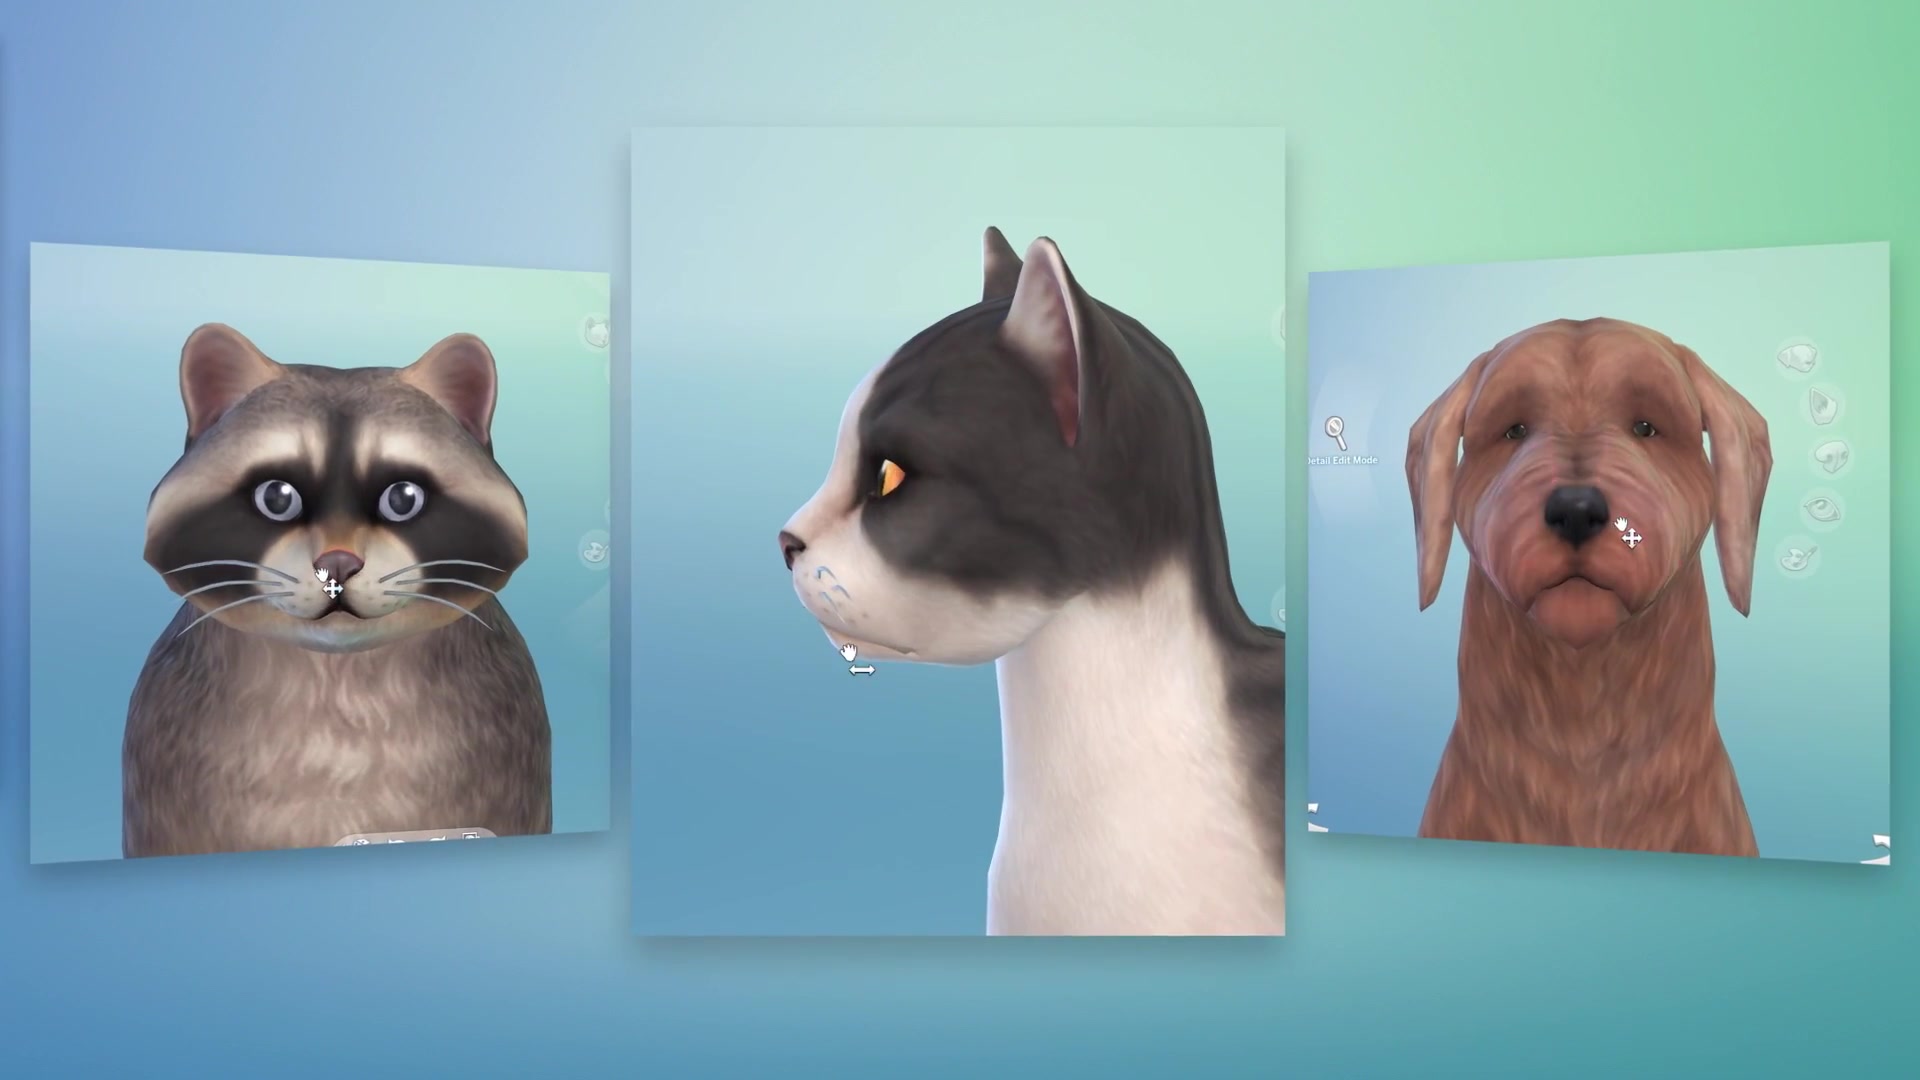 the sims 4 cats and dogs download free full version no survey